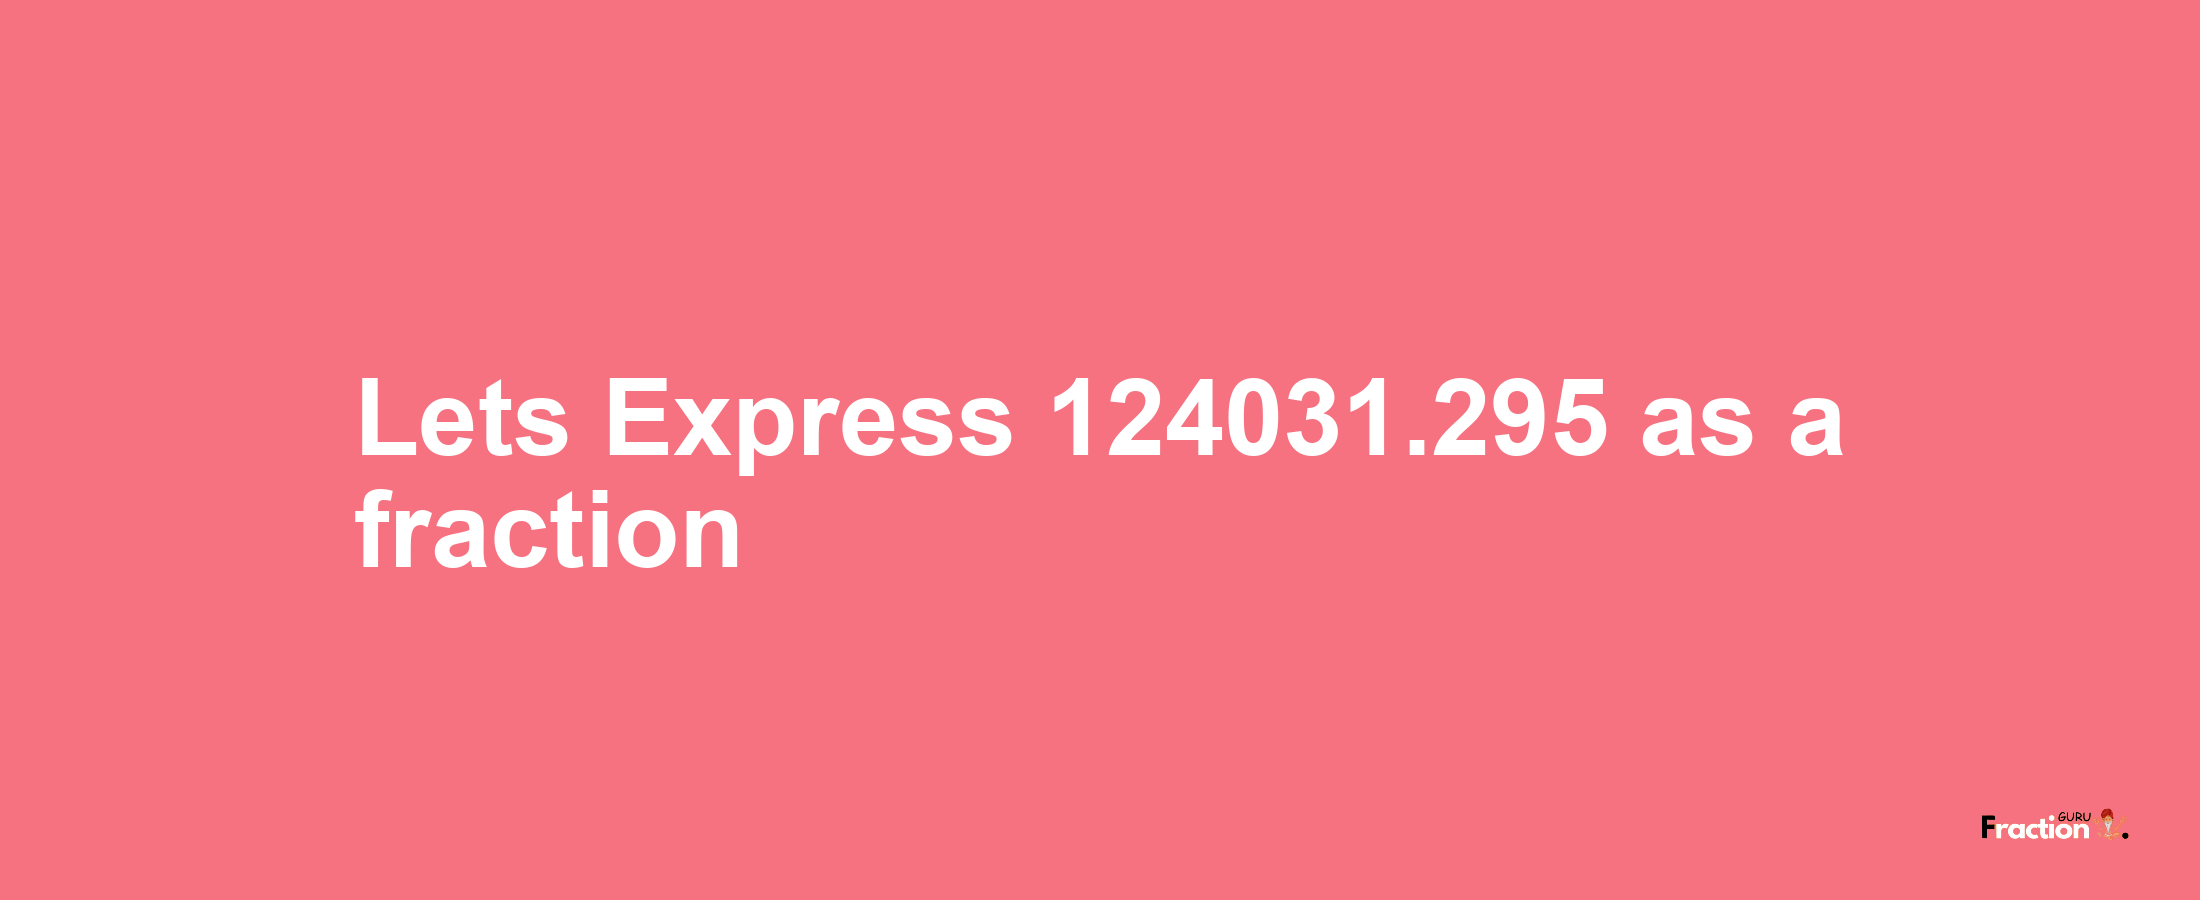 Lets Express 124031.295 as afraction